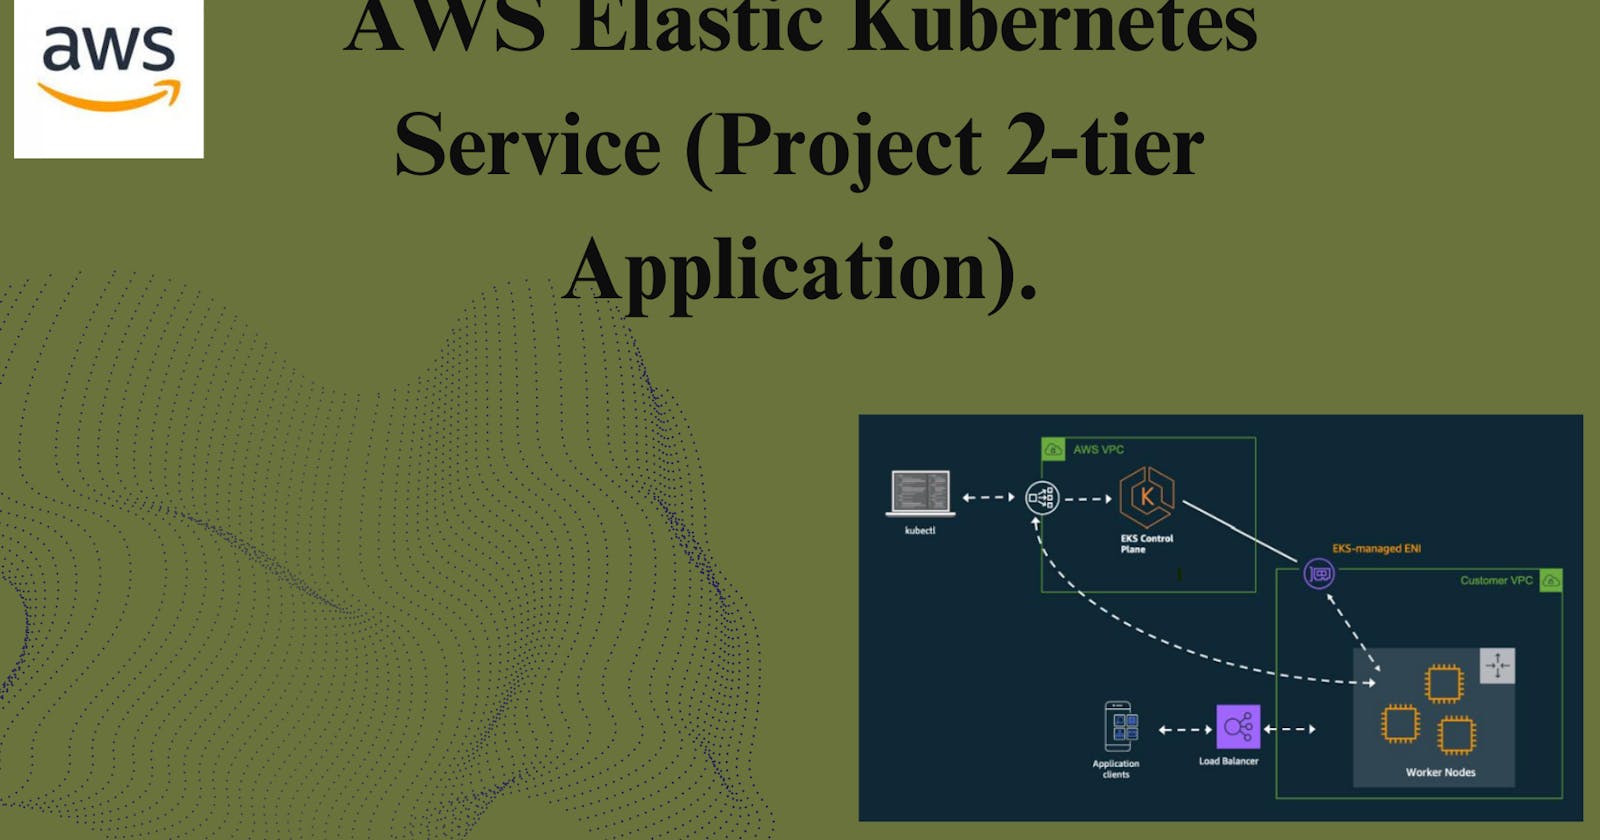 AWS Elastic Kubernetes Service (Project 2-tier Application).